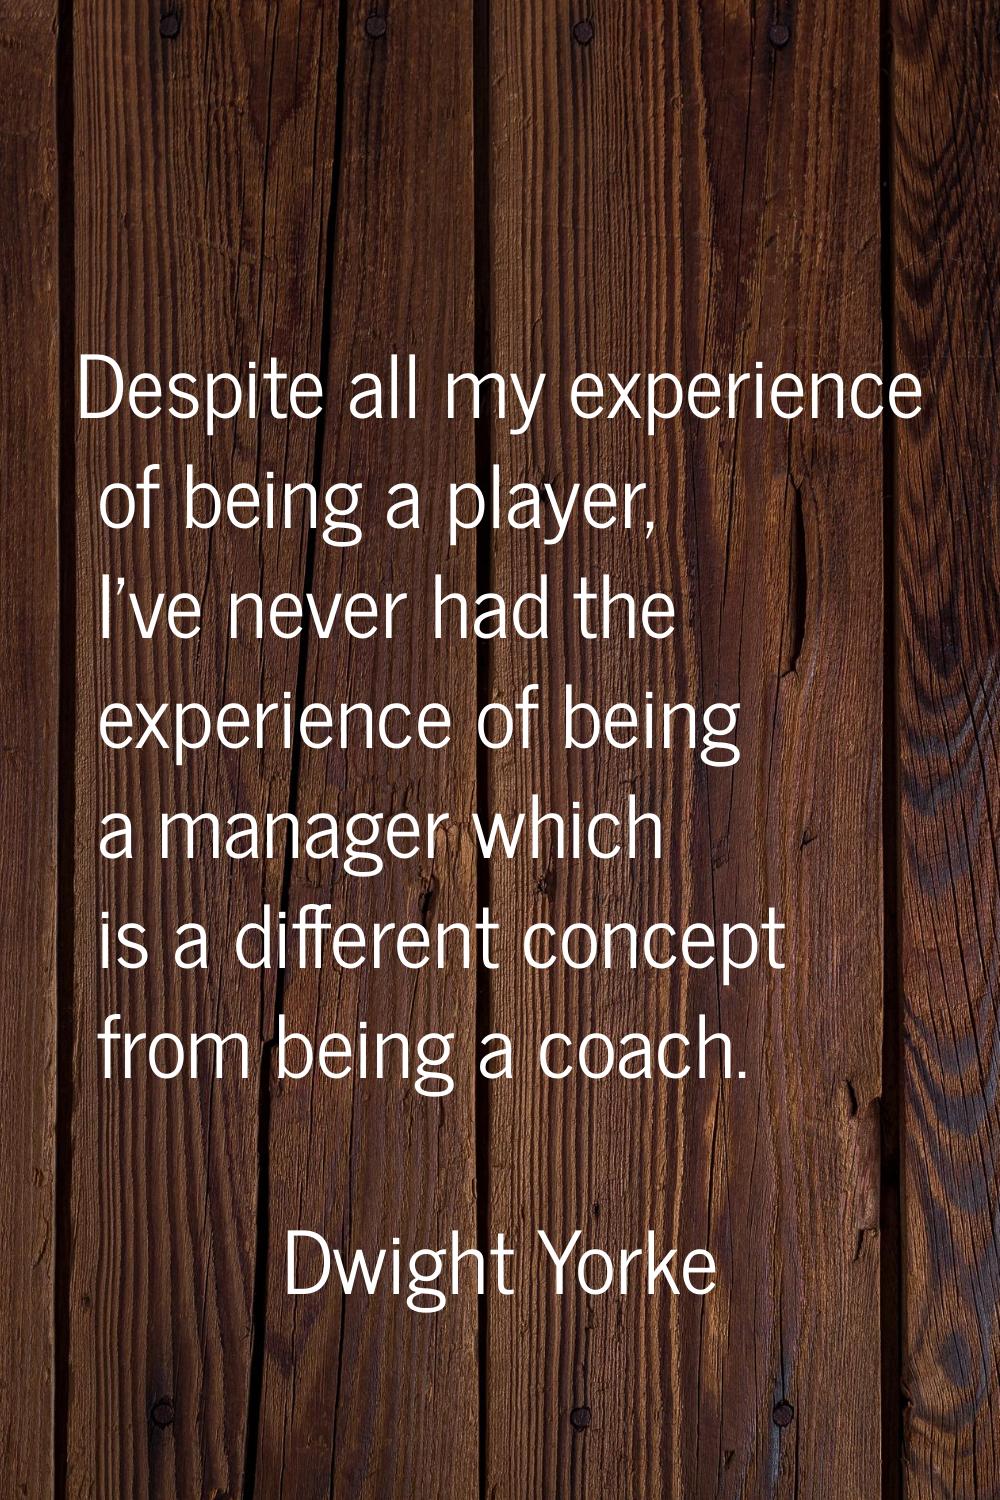 Despite all my experience of being a player, I've never had the experience of being a manager which